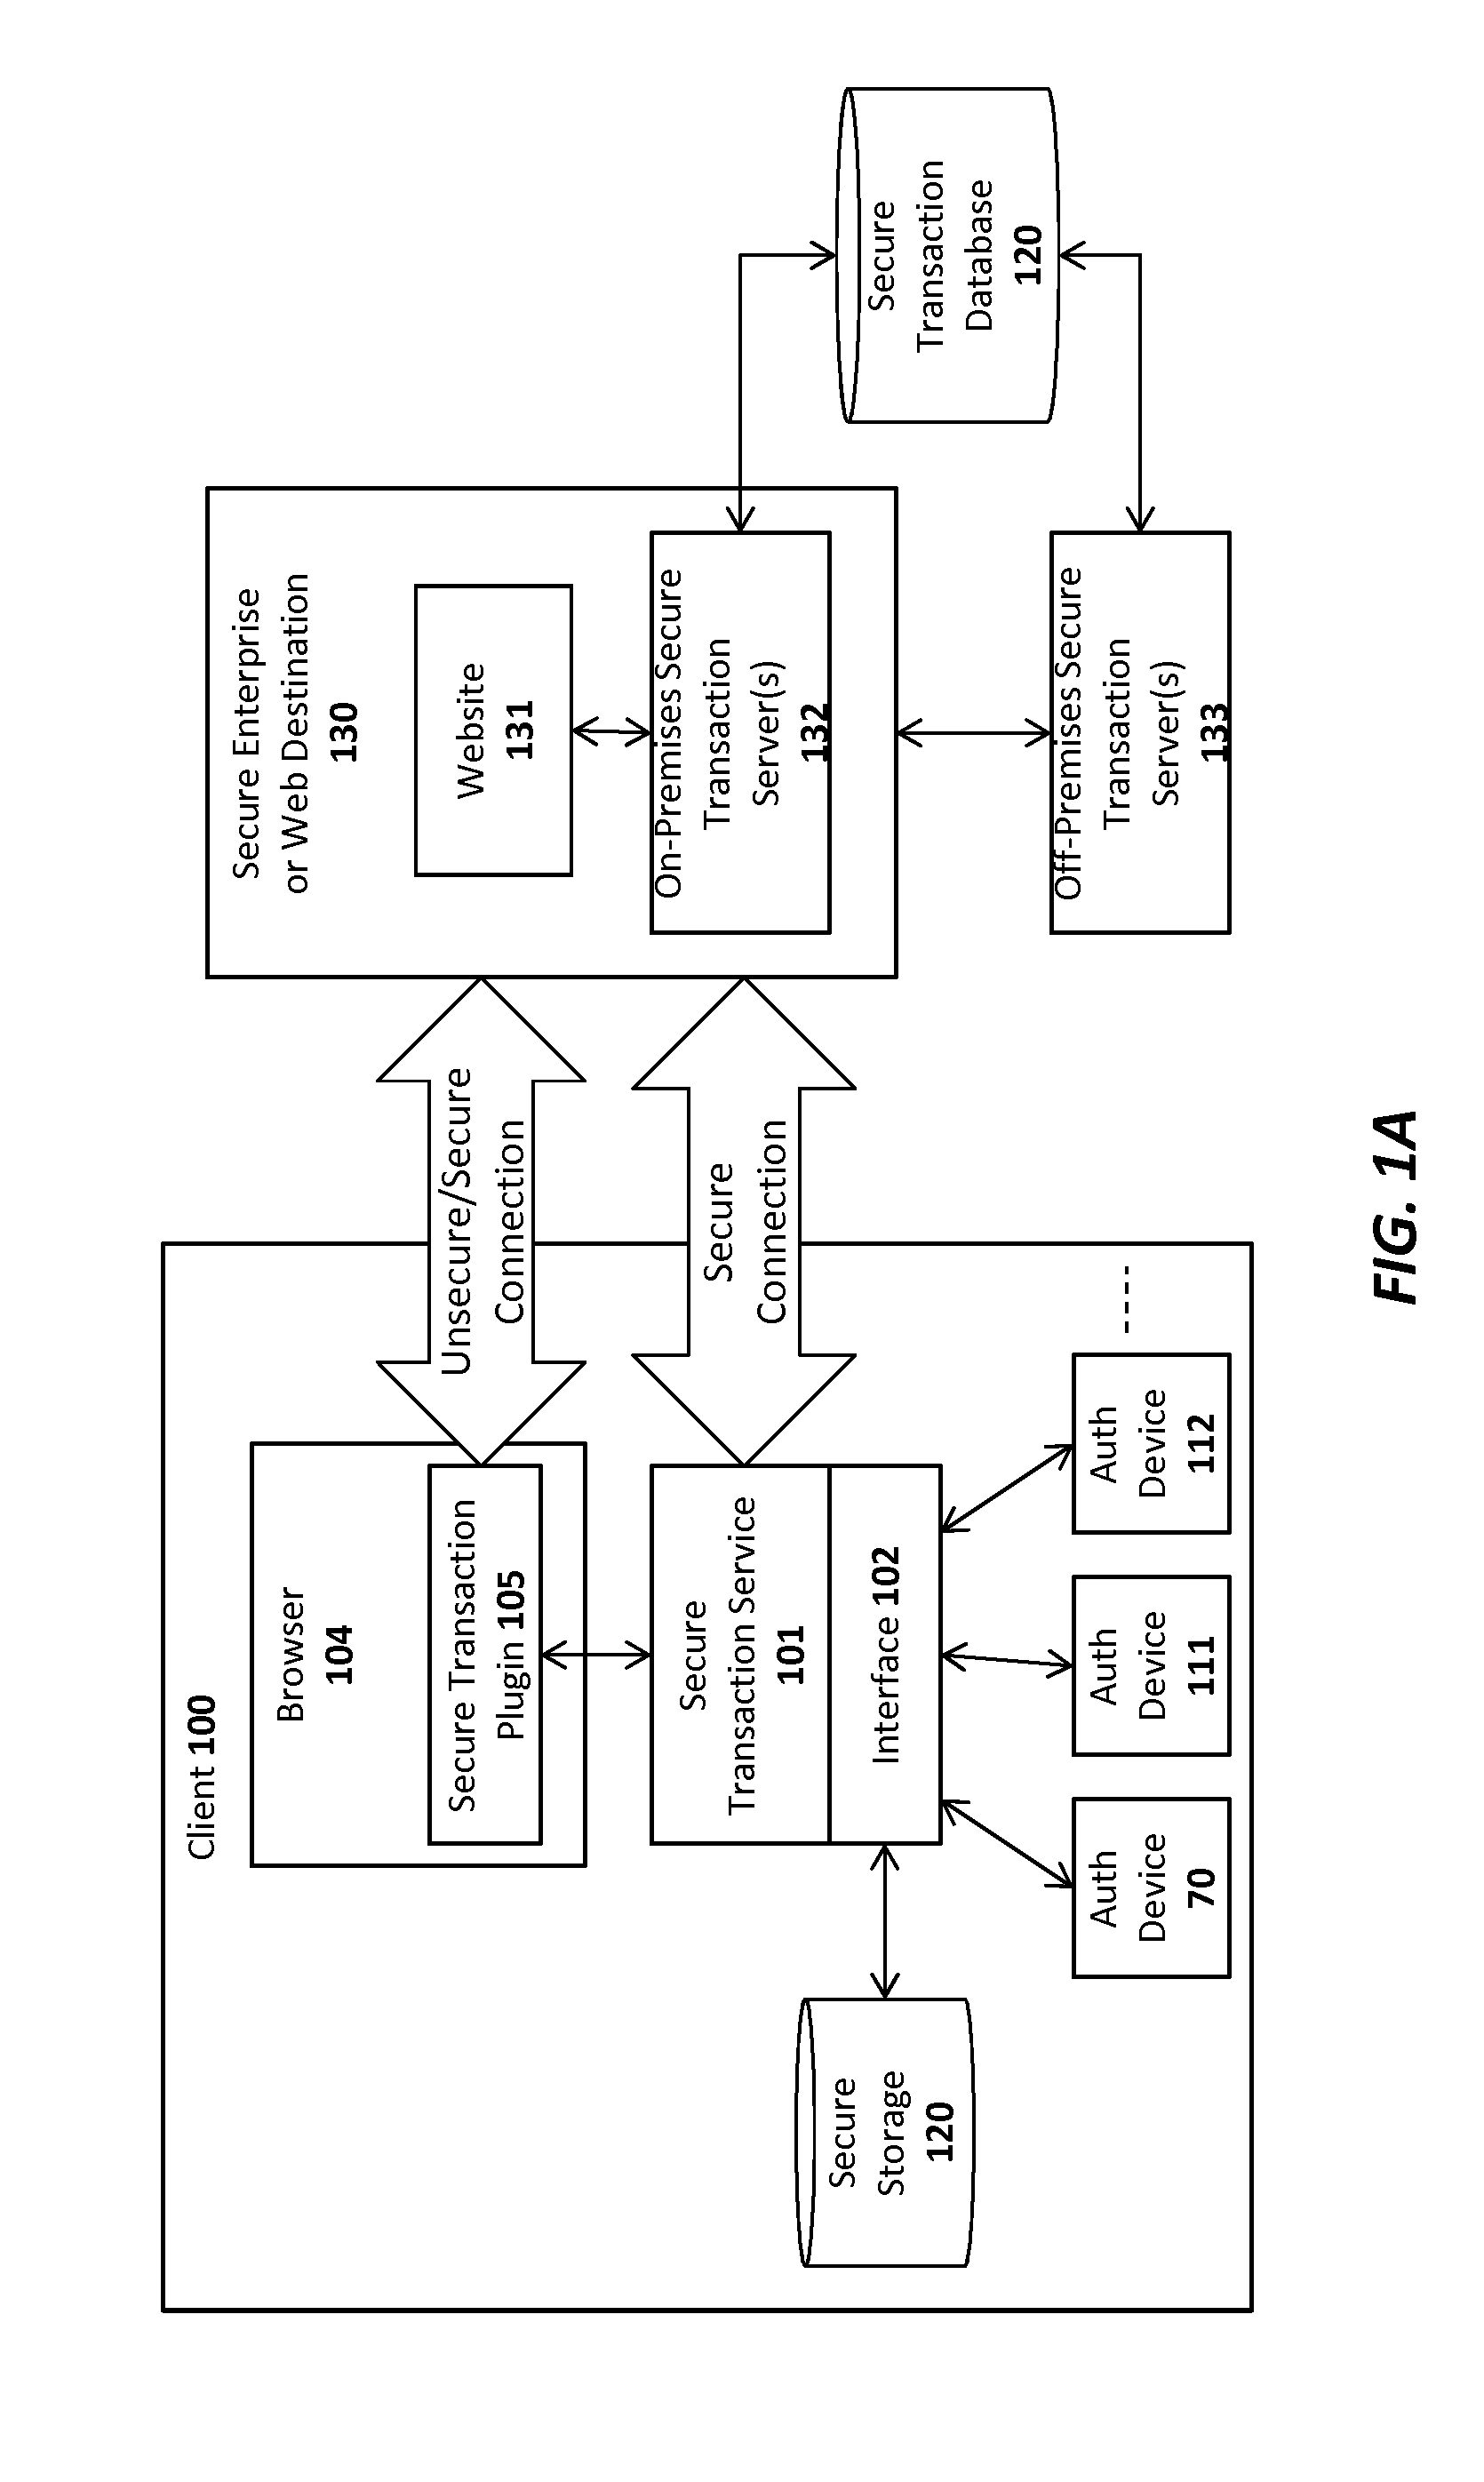 System and method for integrating an authentication service within a network architecture